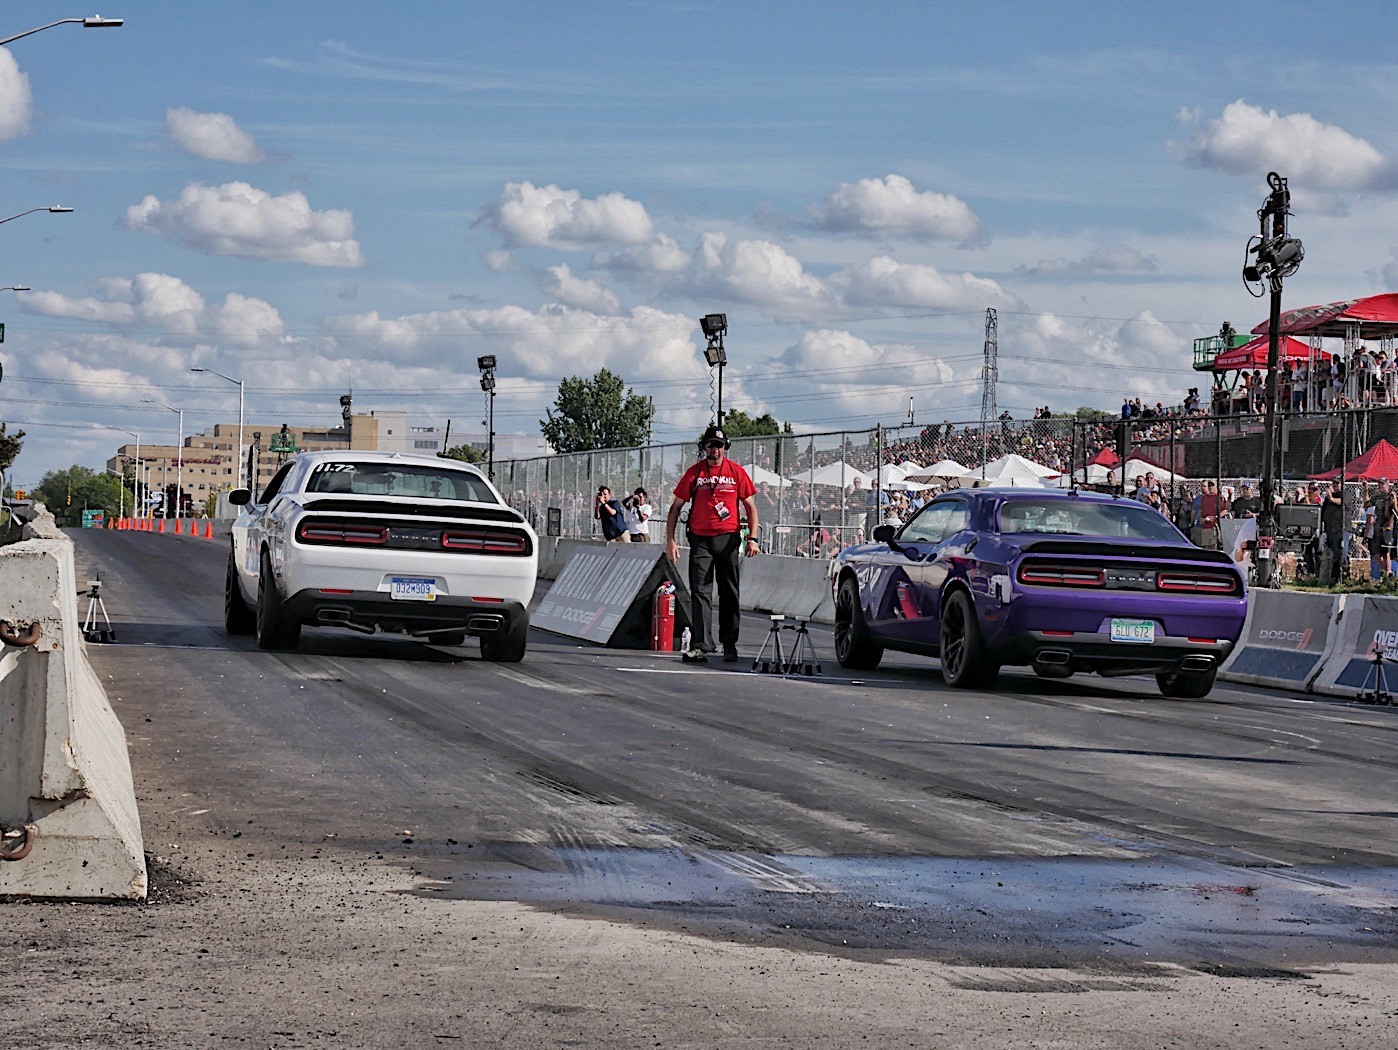 Roadkill Nights Dodge Hellcat Grudge to Be Shown on August 13, Race the